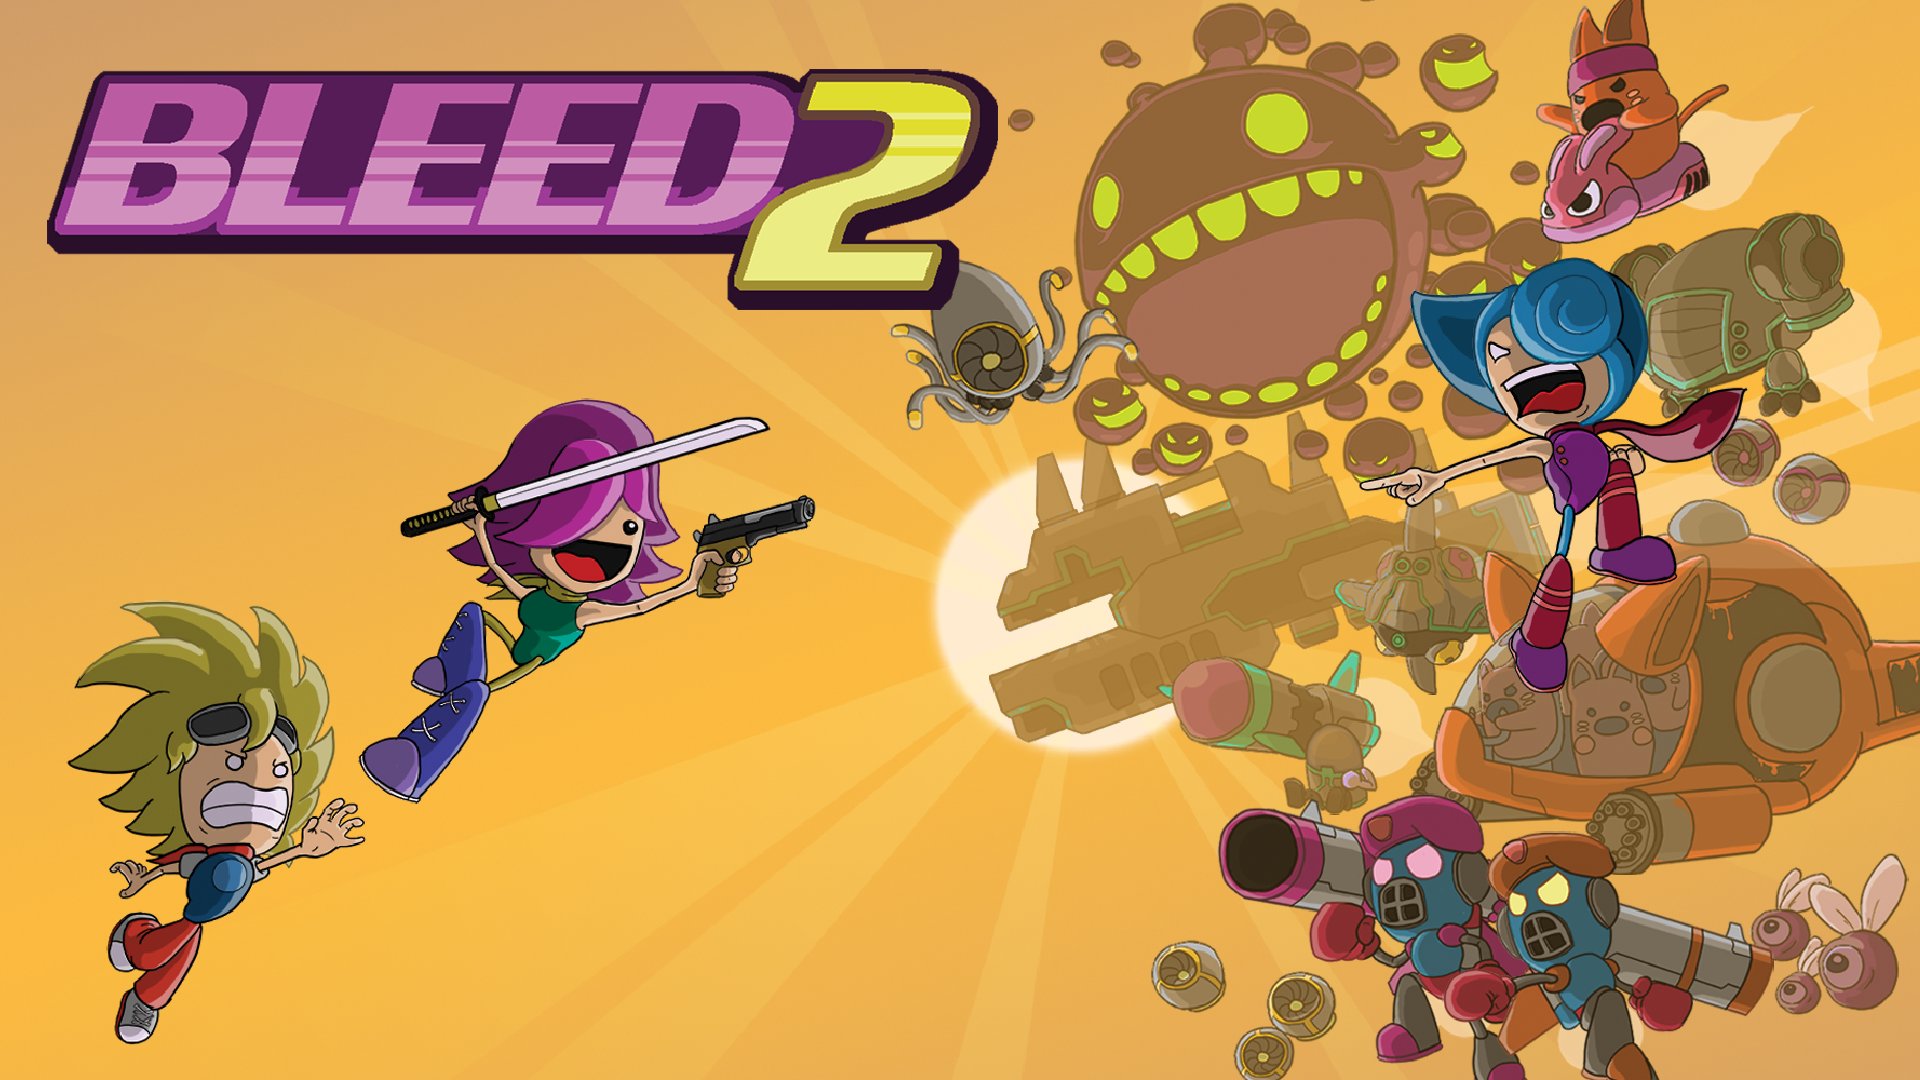 Video For Bleed 2 Available Now on Xbox One